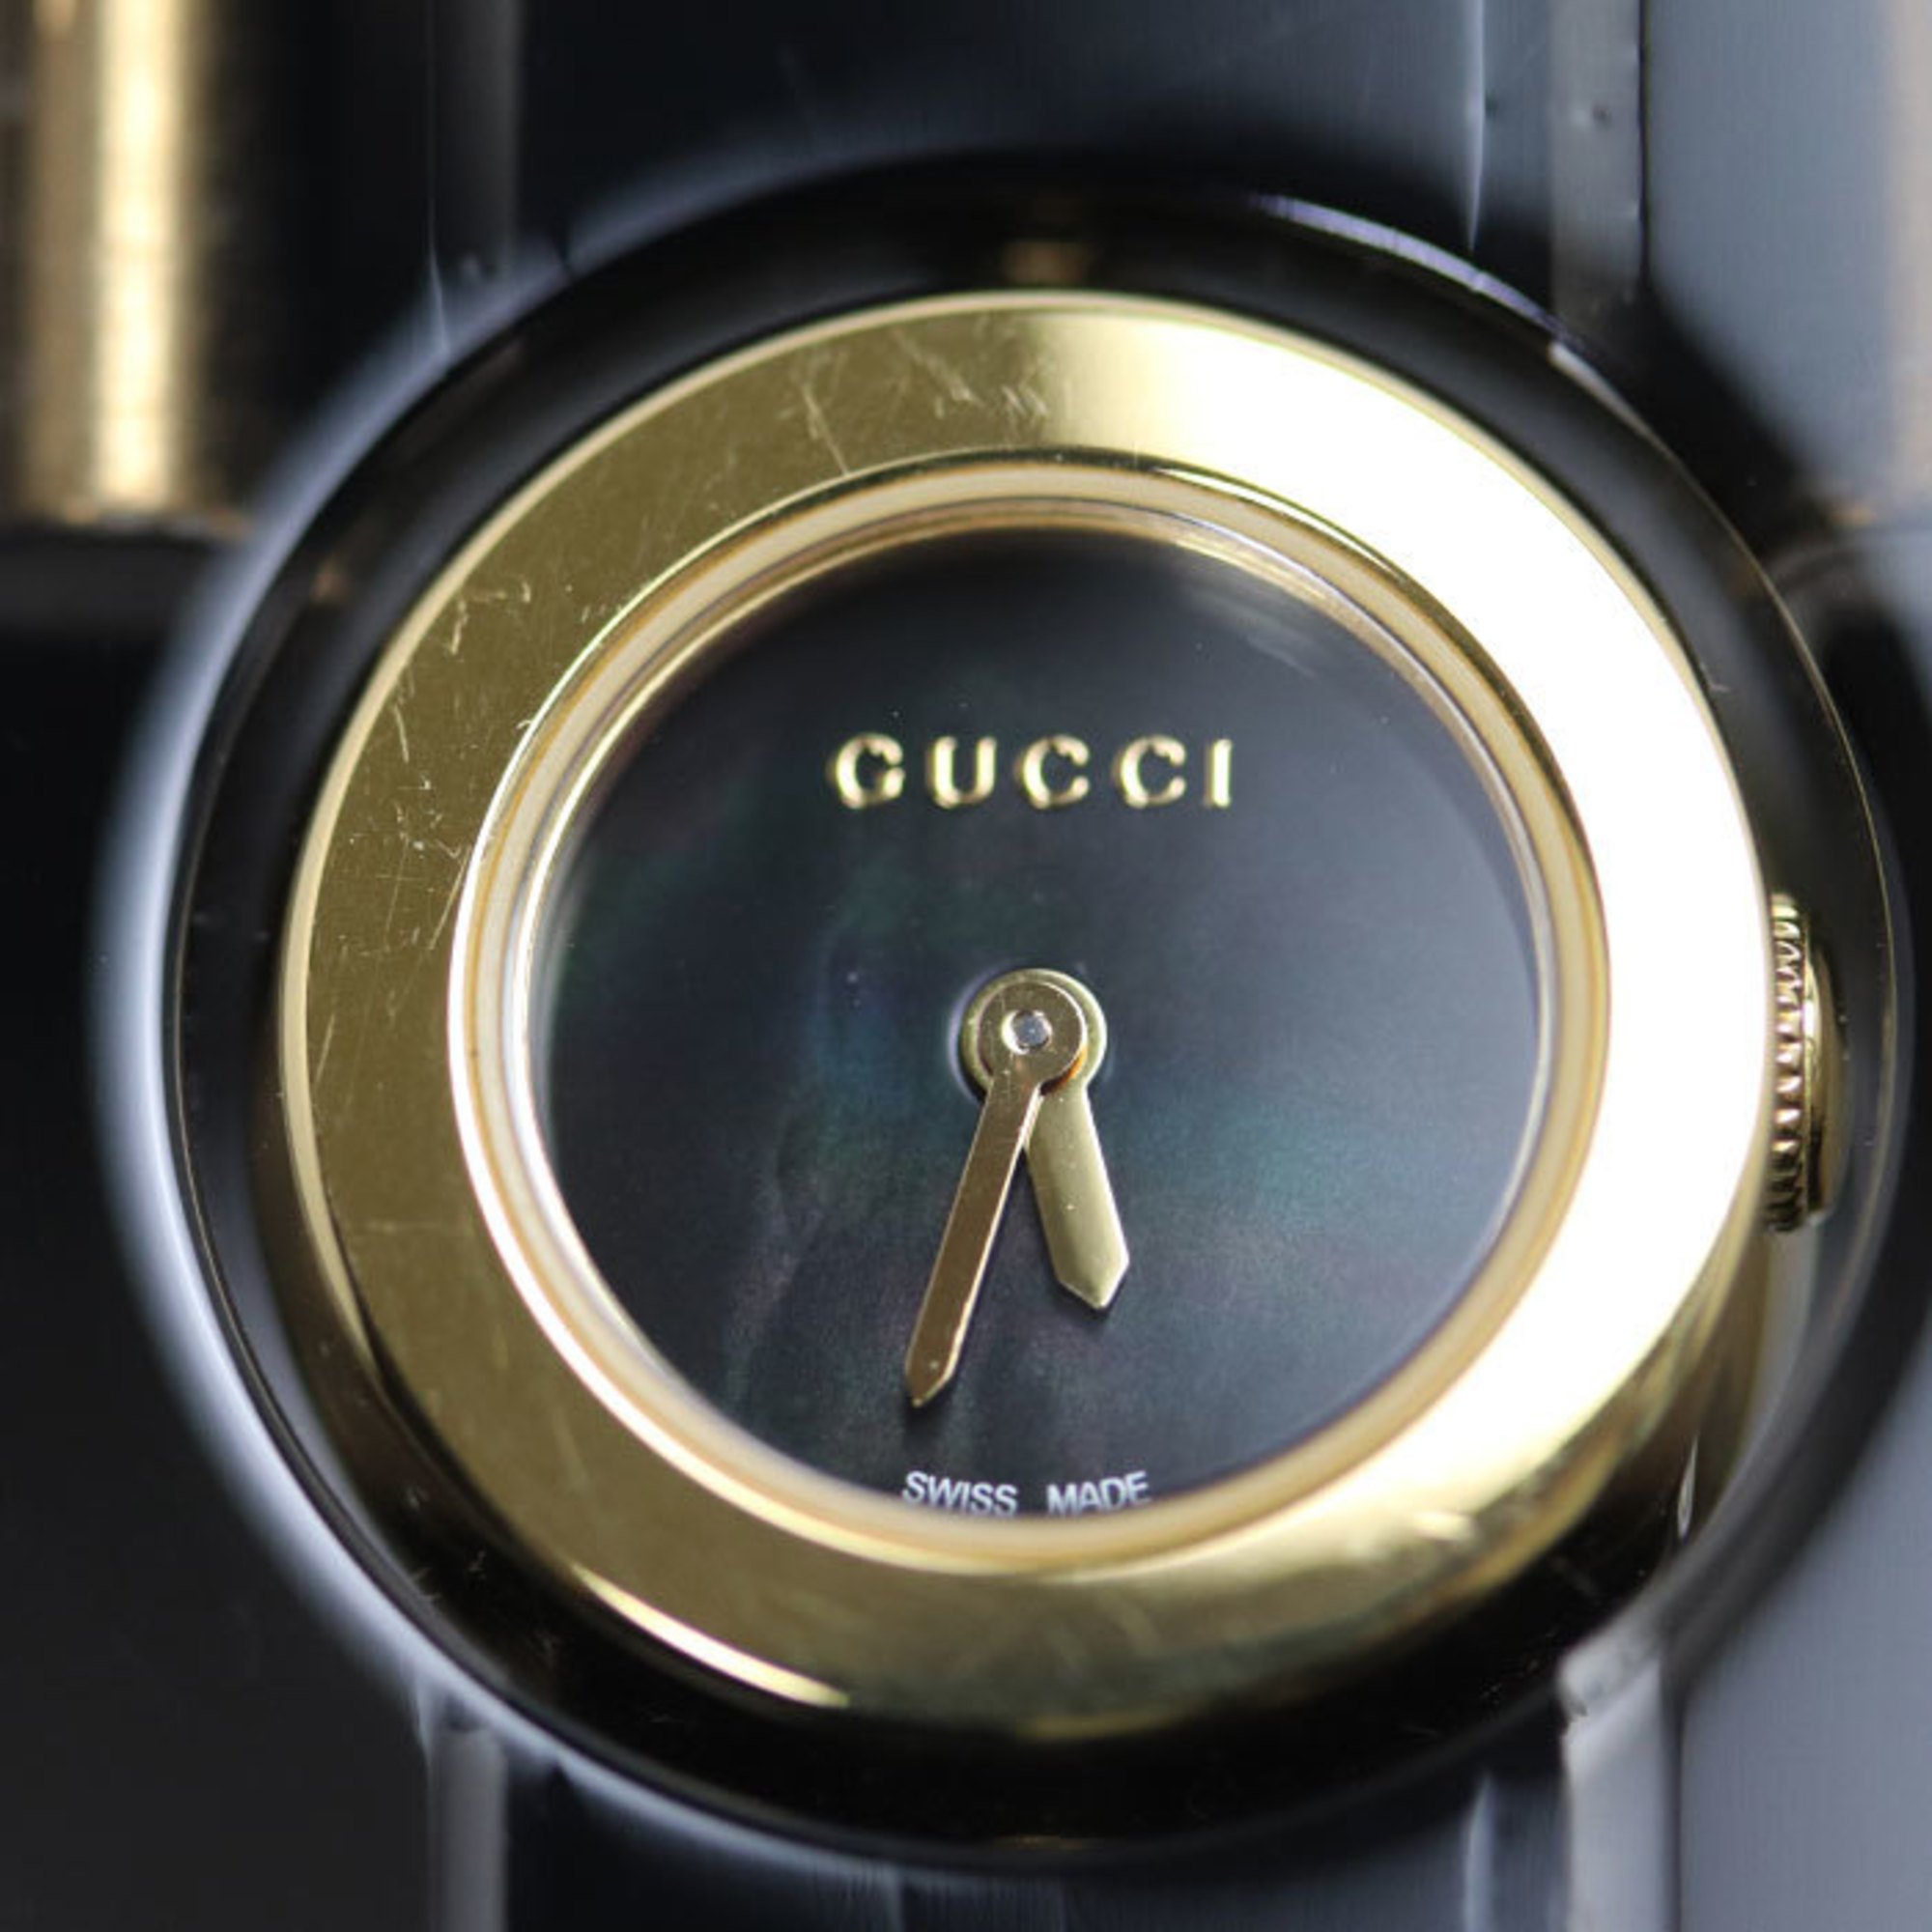 GUCCI Gucci Constance Watch Battery Operated YA150506 150.5 Ladies